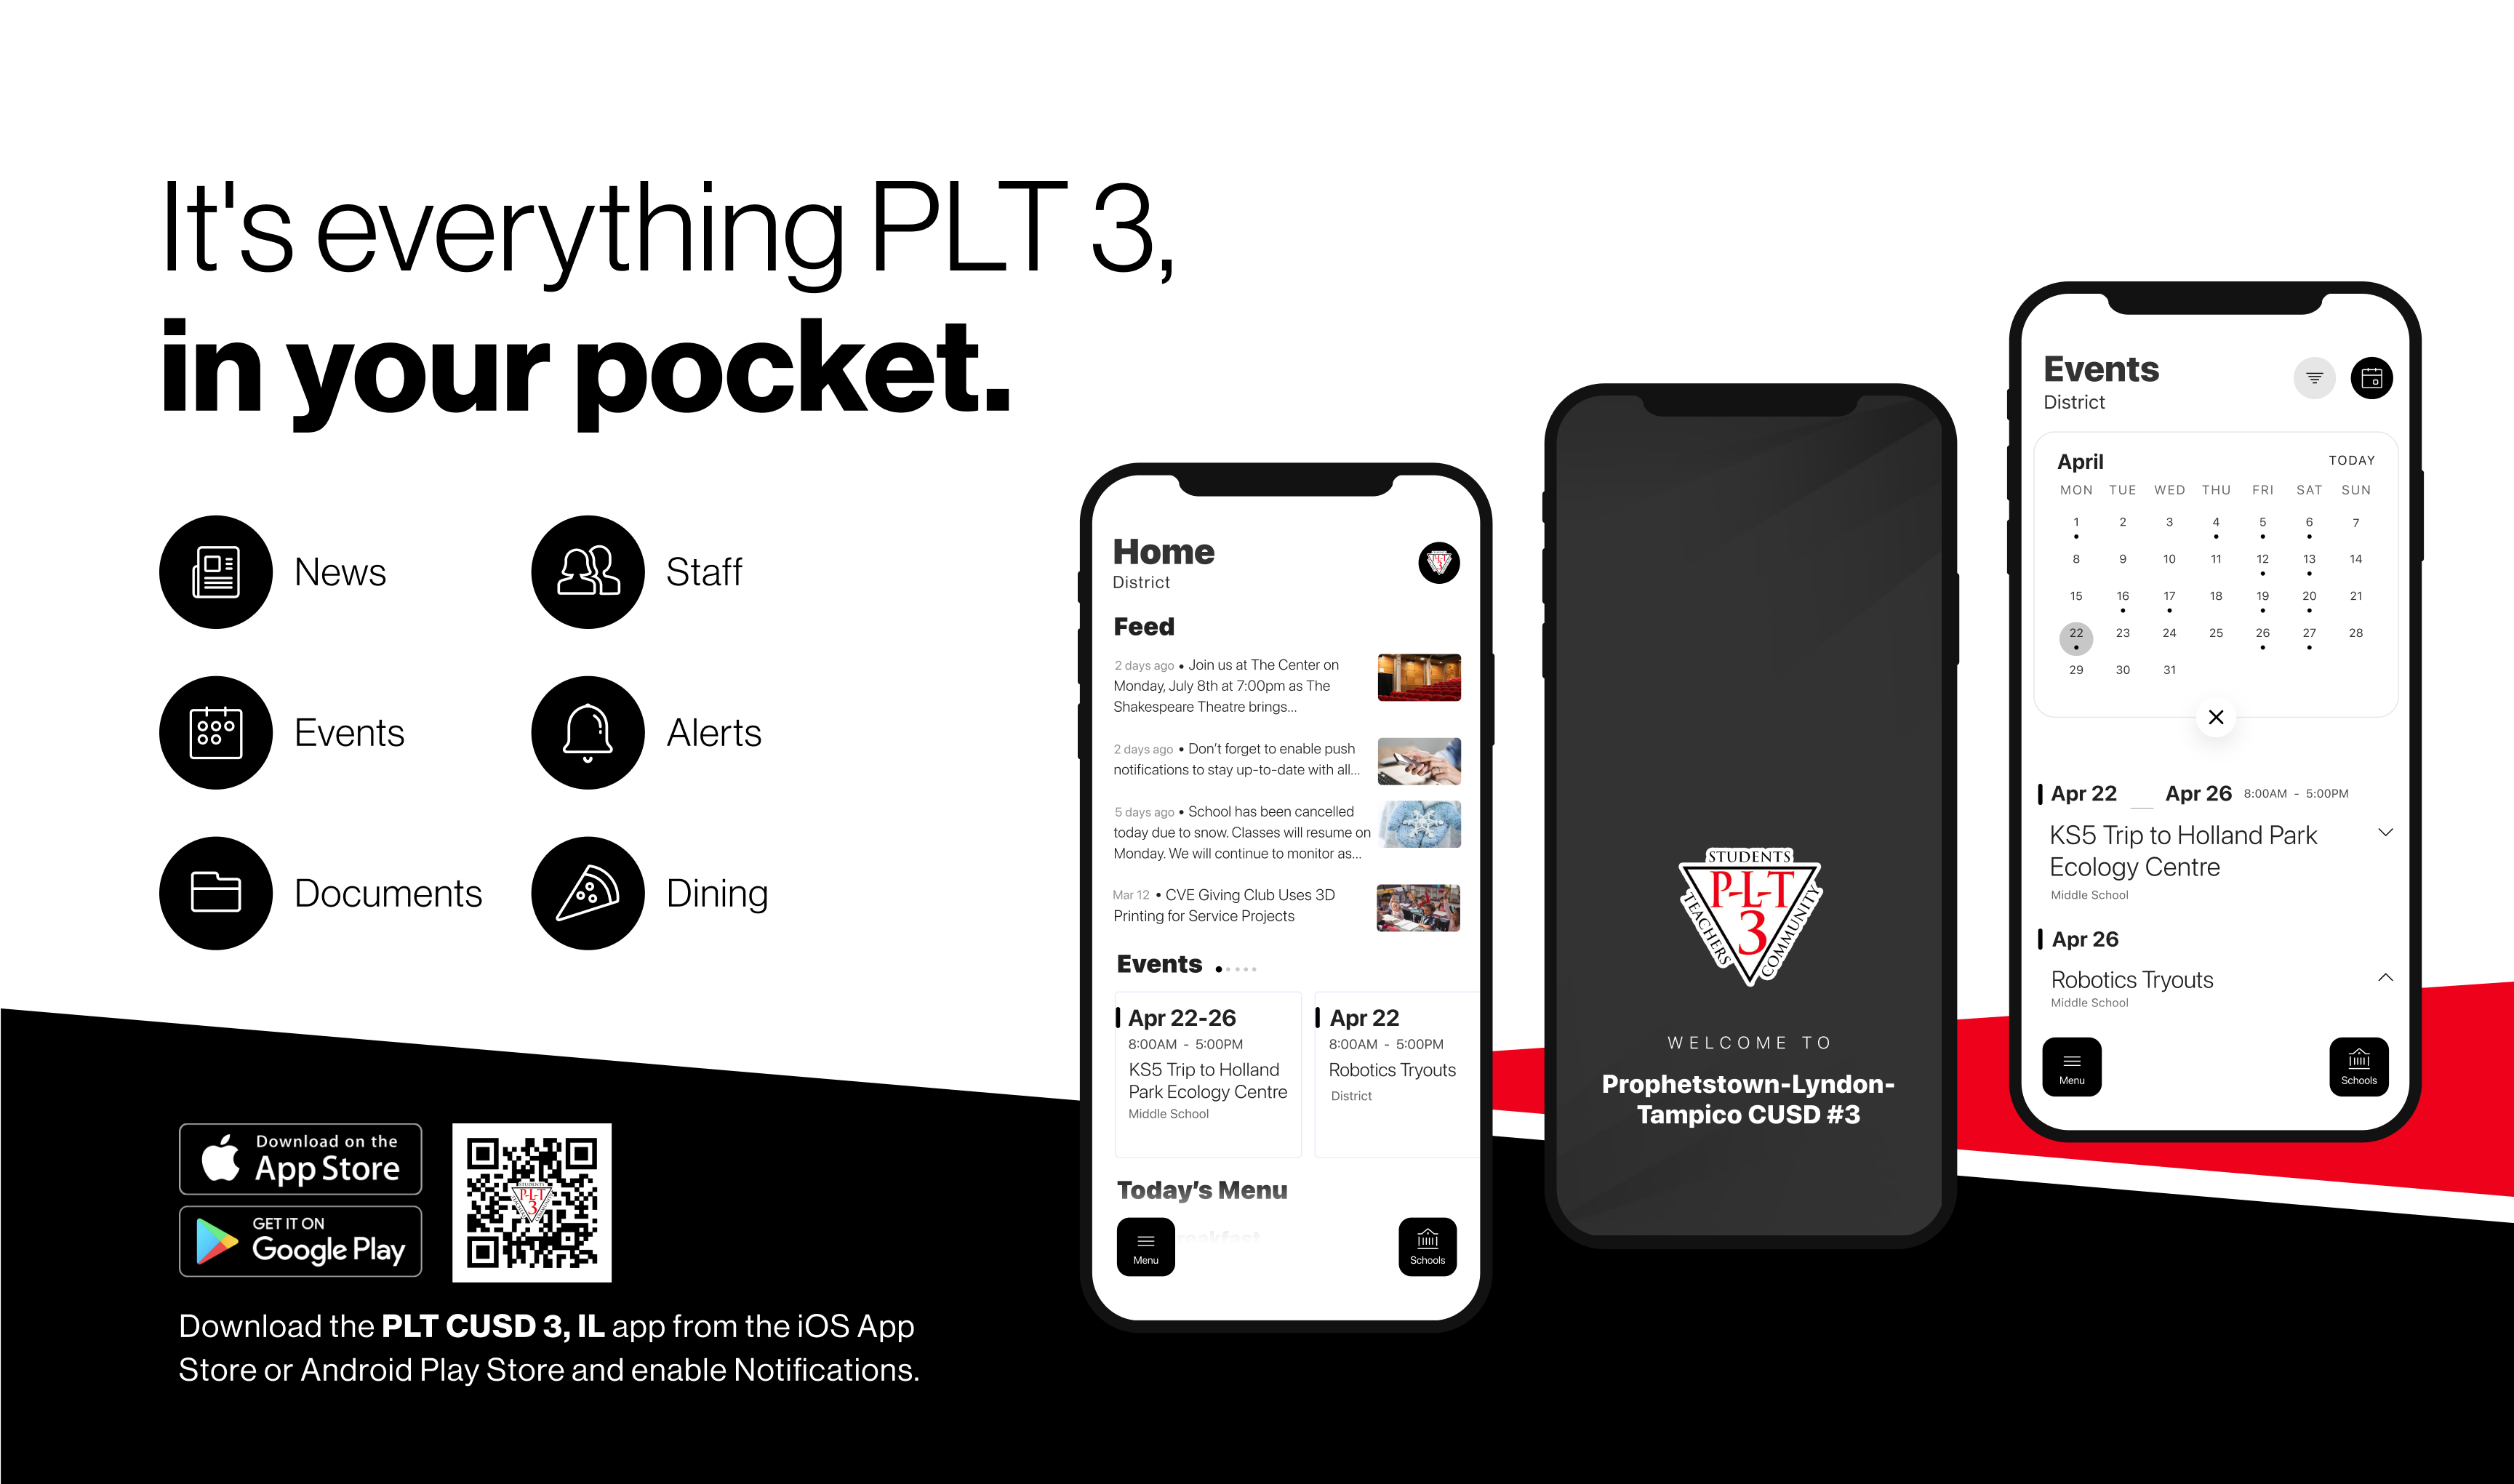 Information on the new school app with a QR code for download and the text "It's everything PLT3, in your pocket"